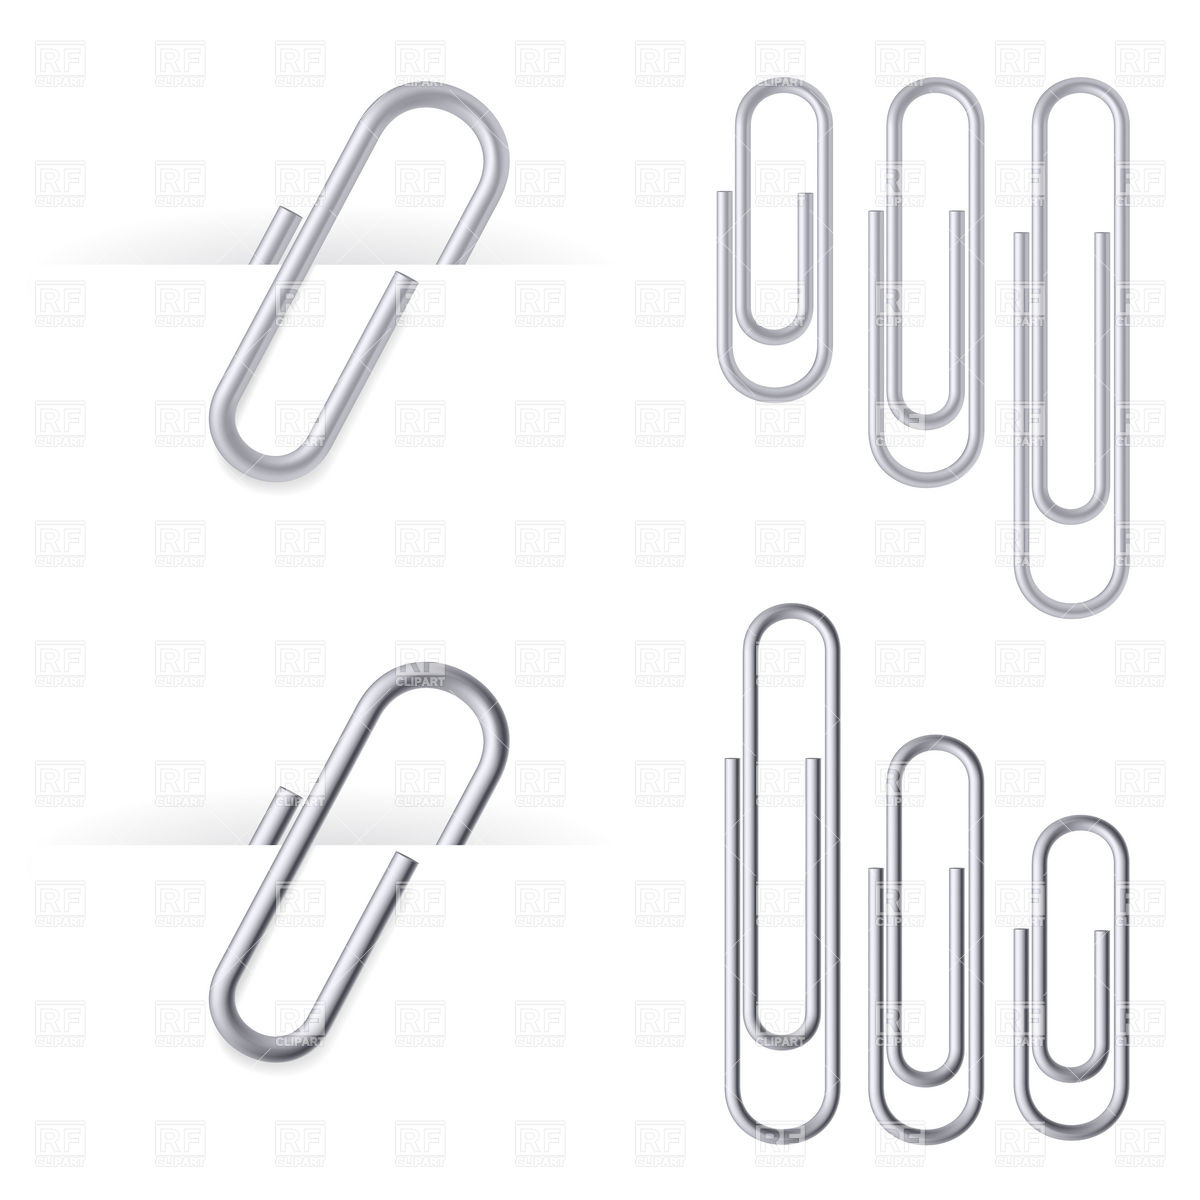 Paper Clip PNG Free - 163682